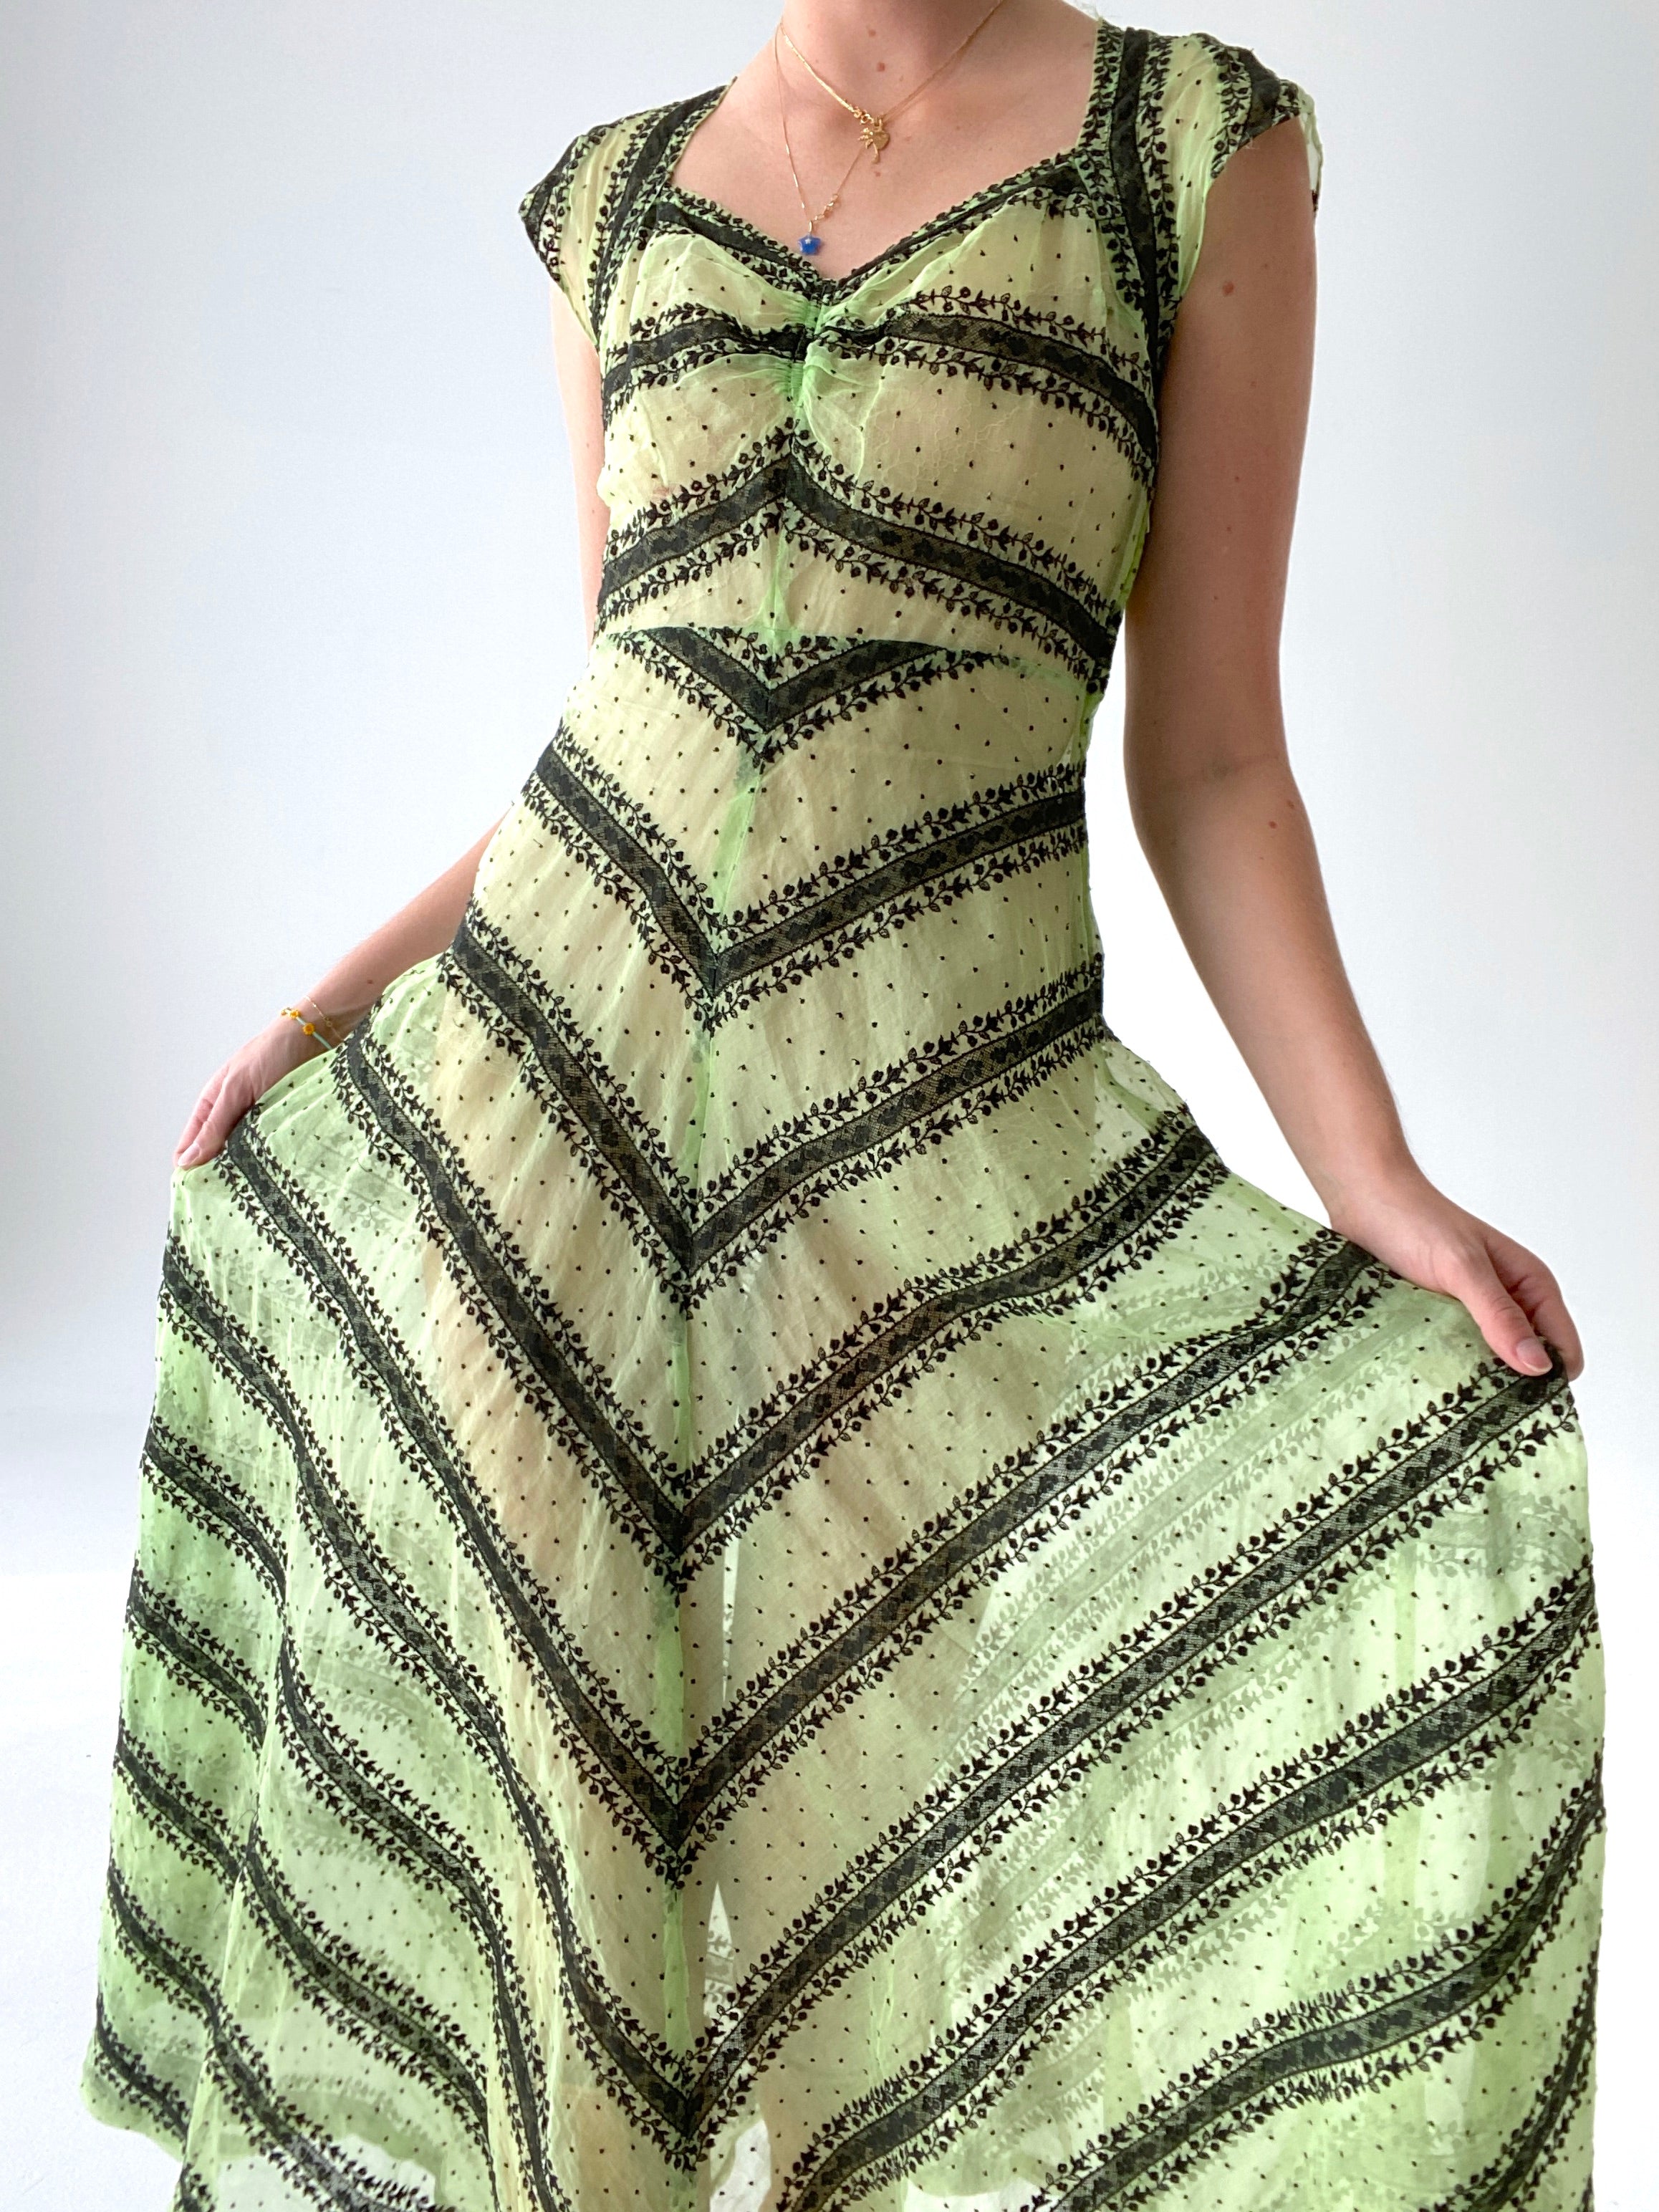 1930's Hand Dyed Green Dress with Black Lace Stripes